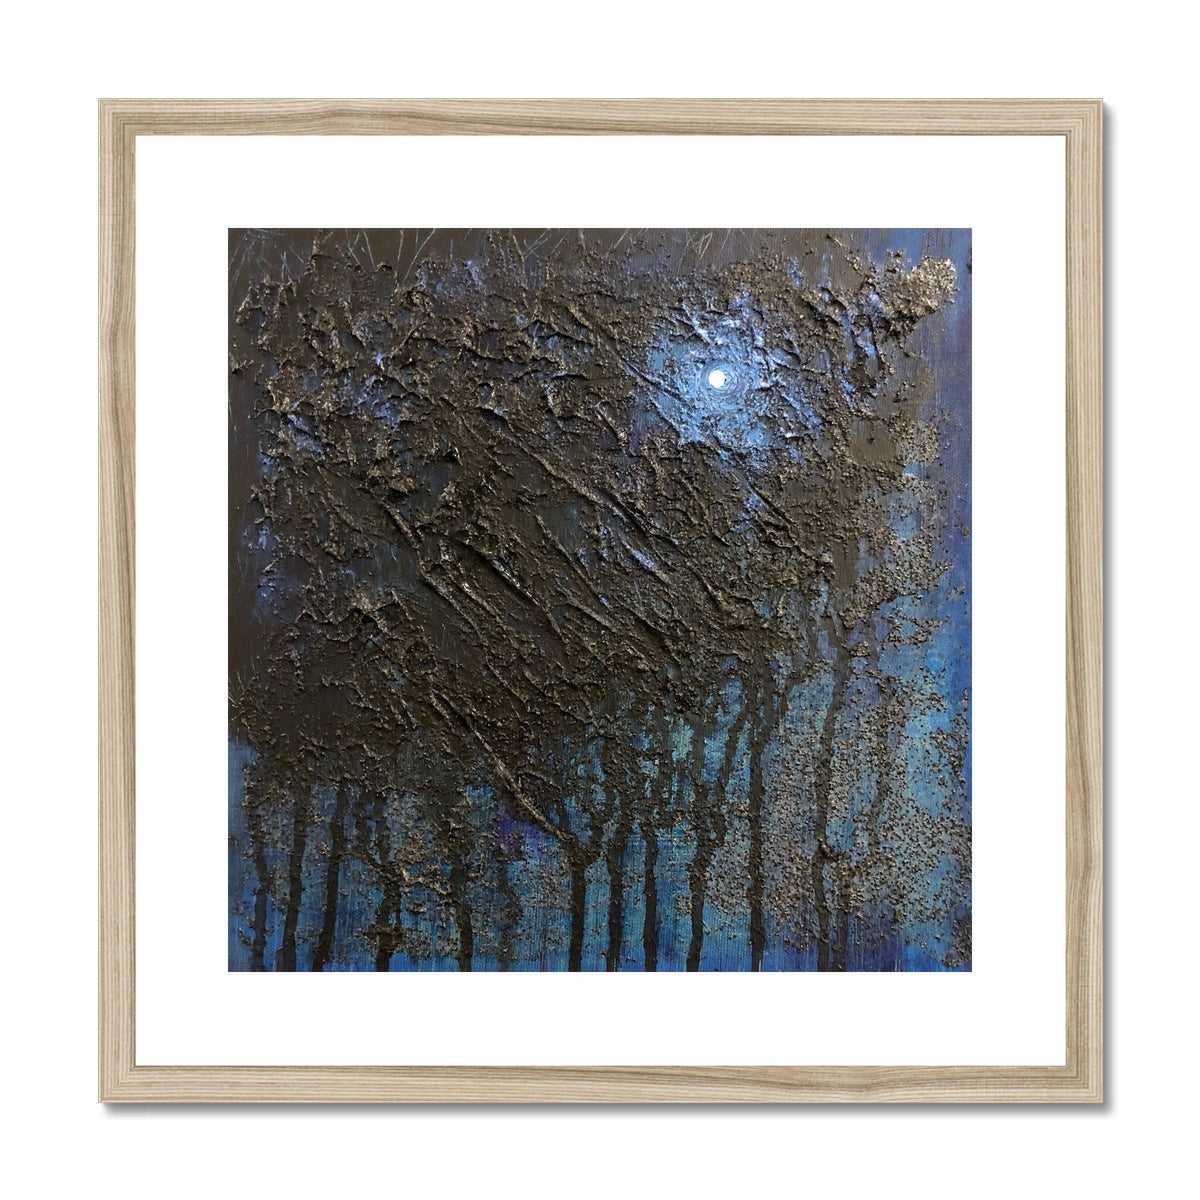 The Blue Moon Wood Abstract Painting | Framed & Mounted Prints From Scotland-Framed & Mounted Prints-Abstract & Impressionistic Art Gallery-20"x20"-Natural Frame-Paintings, Prints, Homeware, Art Gifts From Scotland By Scottish Artist Kevin Hunter